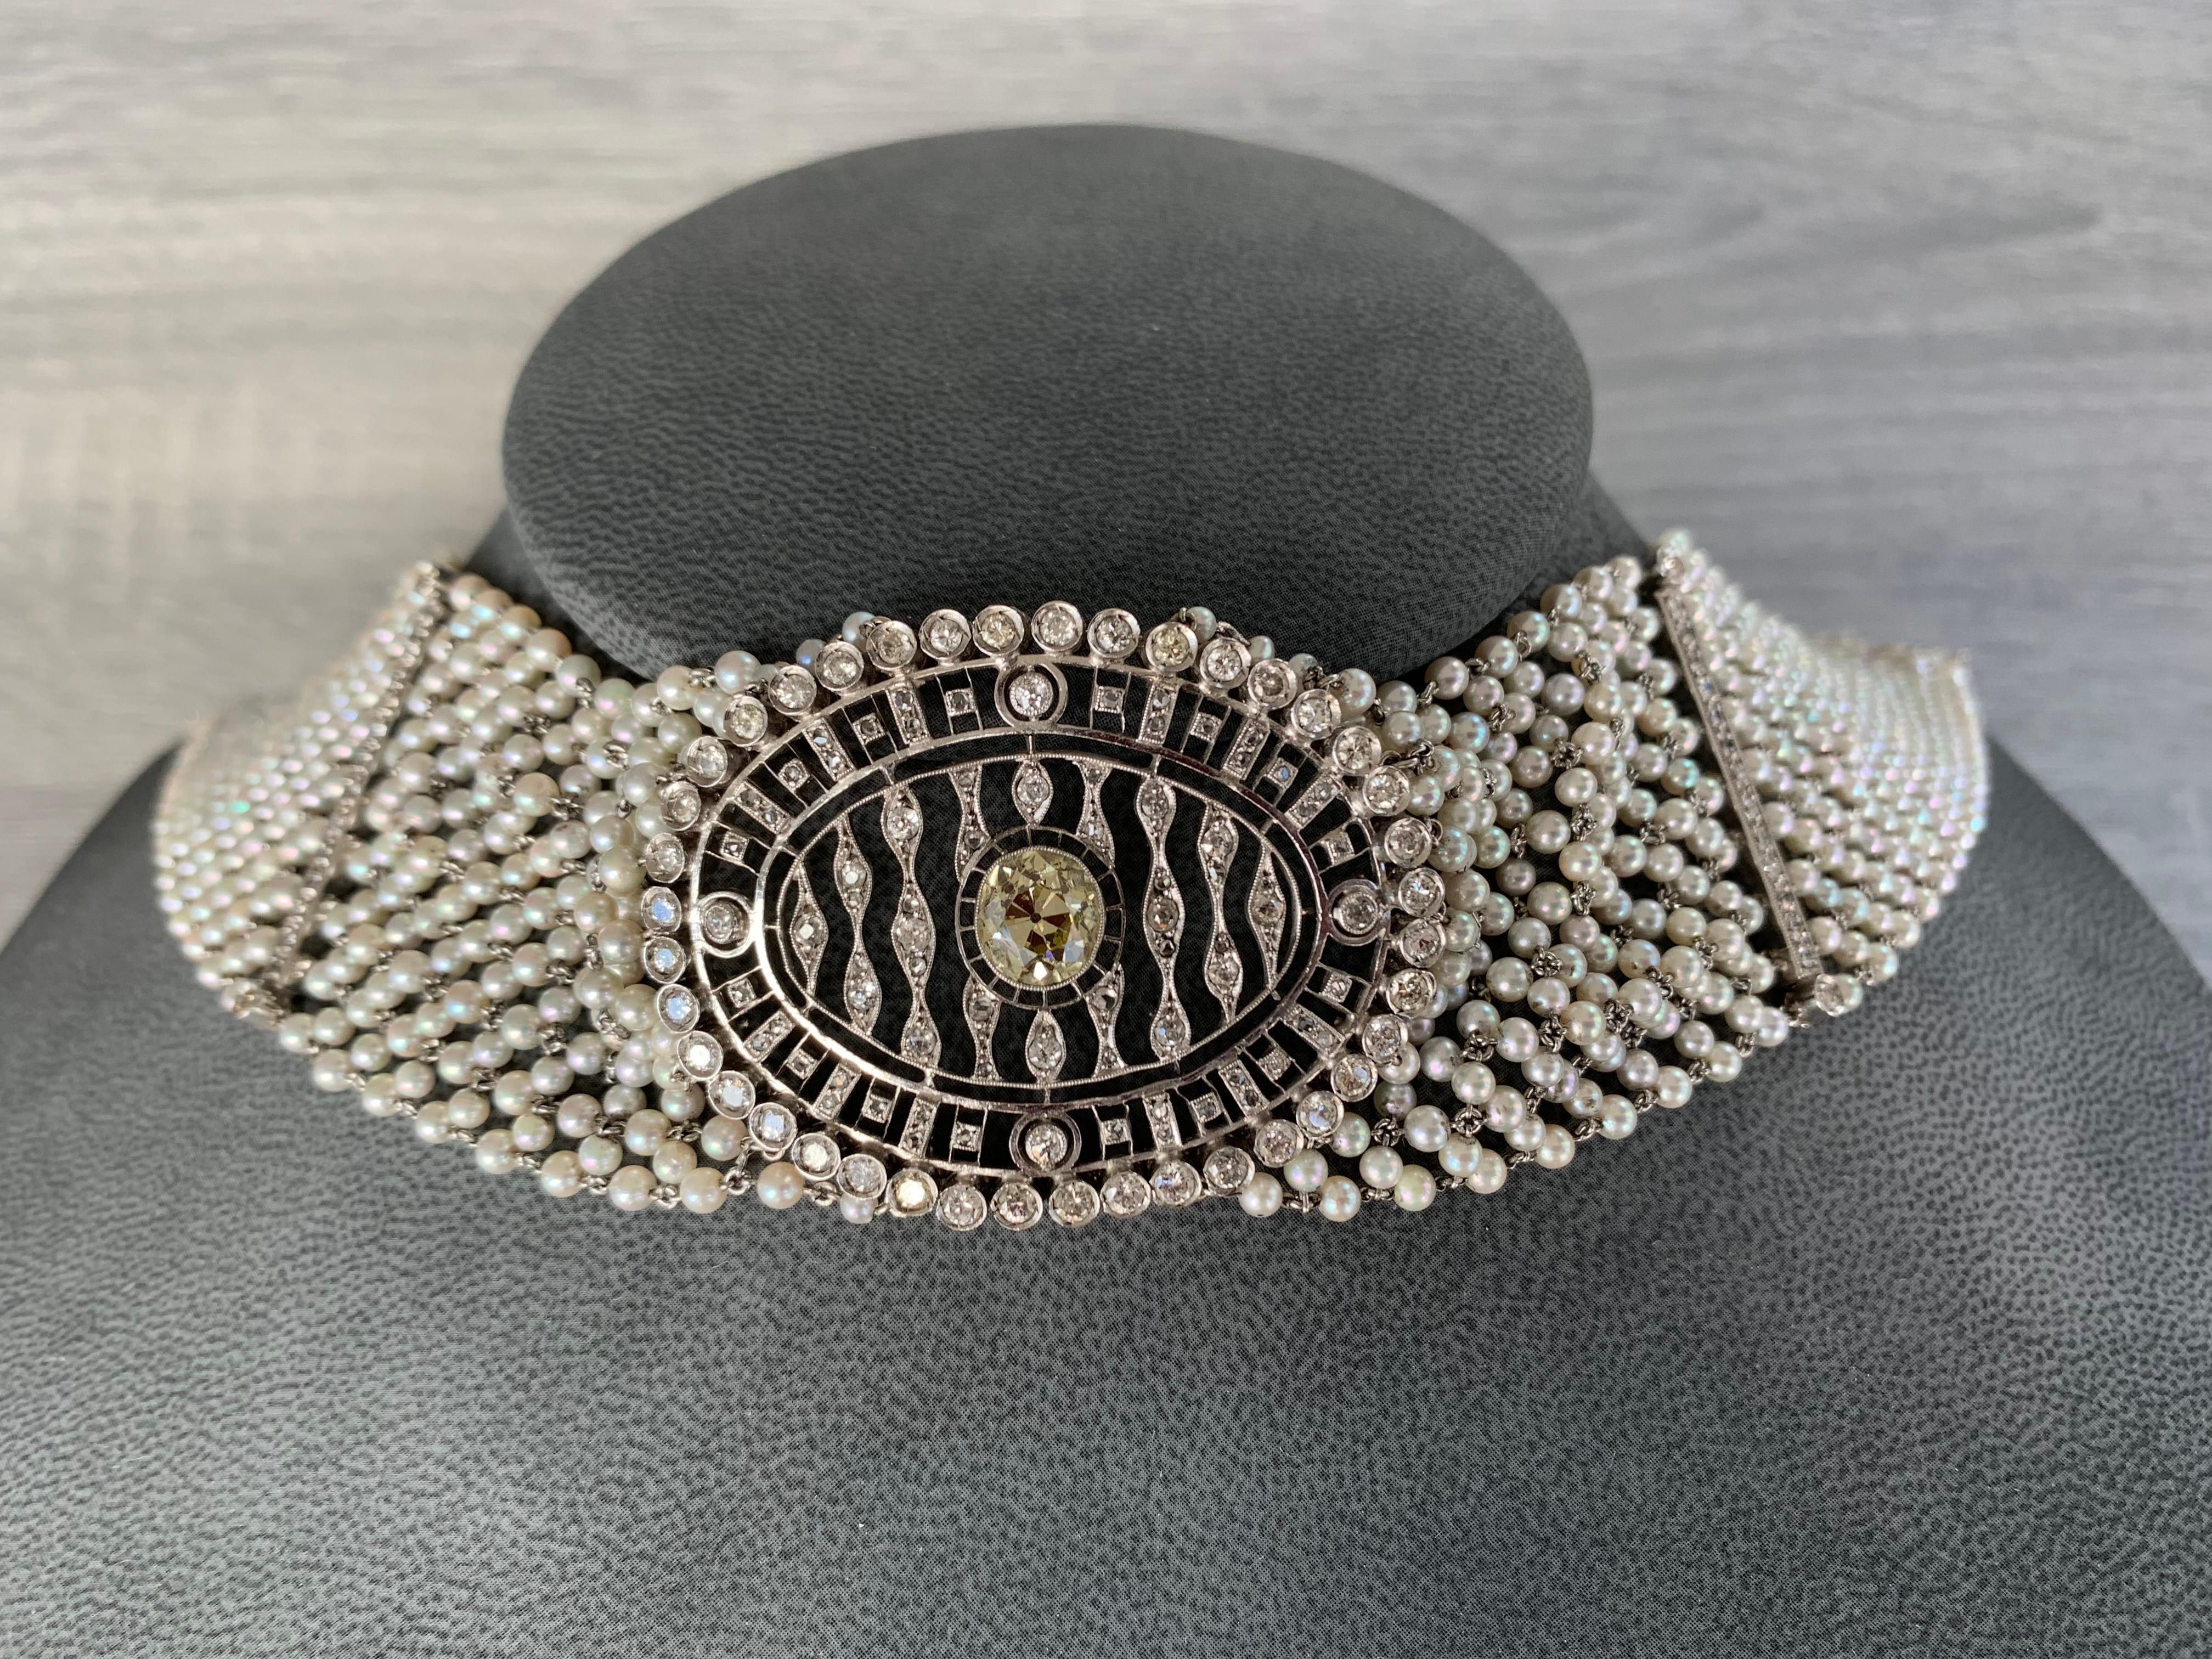 Diamond and Pearl Choker Necklace
1 center old mine cut diamond, 2.38 carats
59 round cut diamonds, 3.50 carats
55 rose cut diamonds, approximately 0.15 carats 

Mounted in white gold and platinum. 

Length approx 13.50 inches

Made Circa 1935
